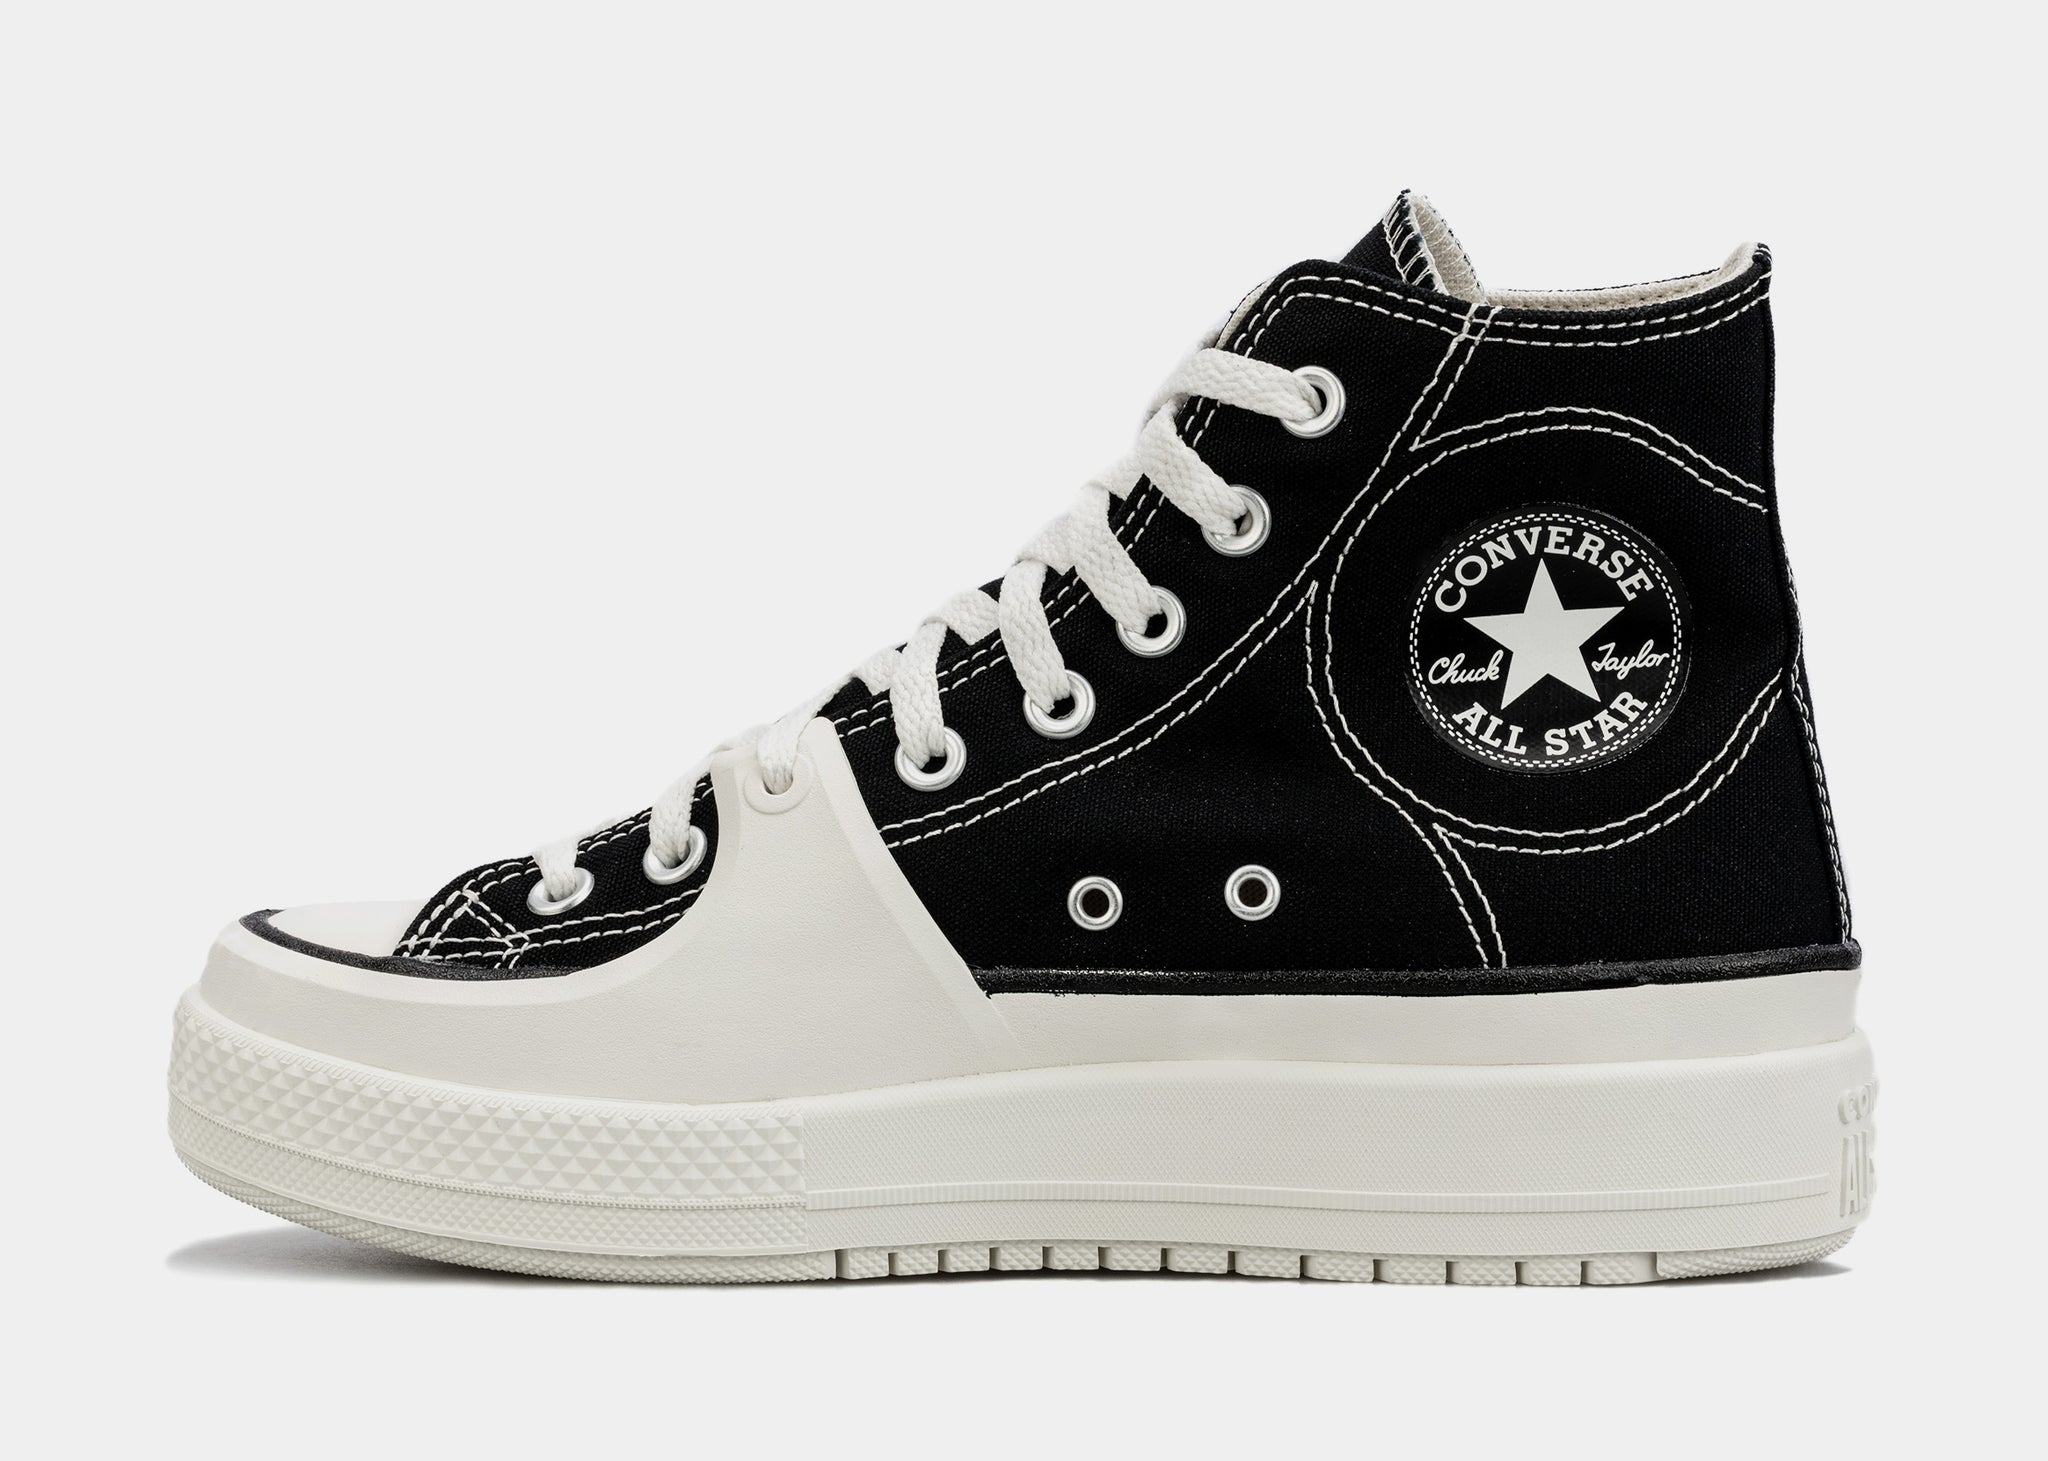 Converse Chuck Taylor All Star Construct Mens Lifestyle Shoes Black ...